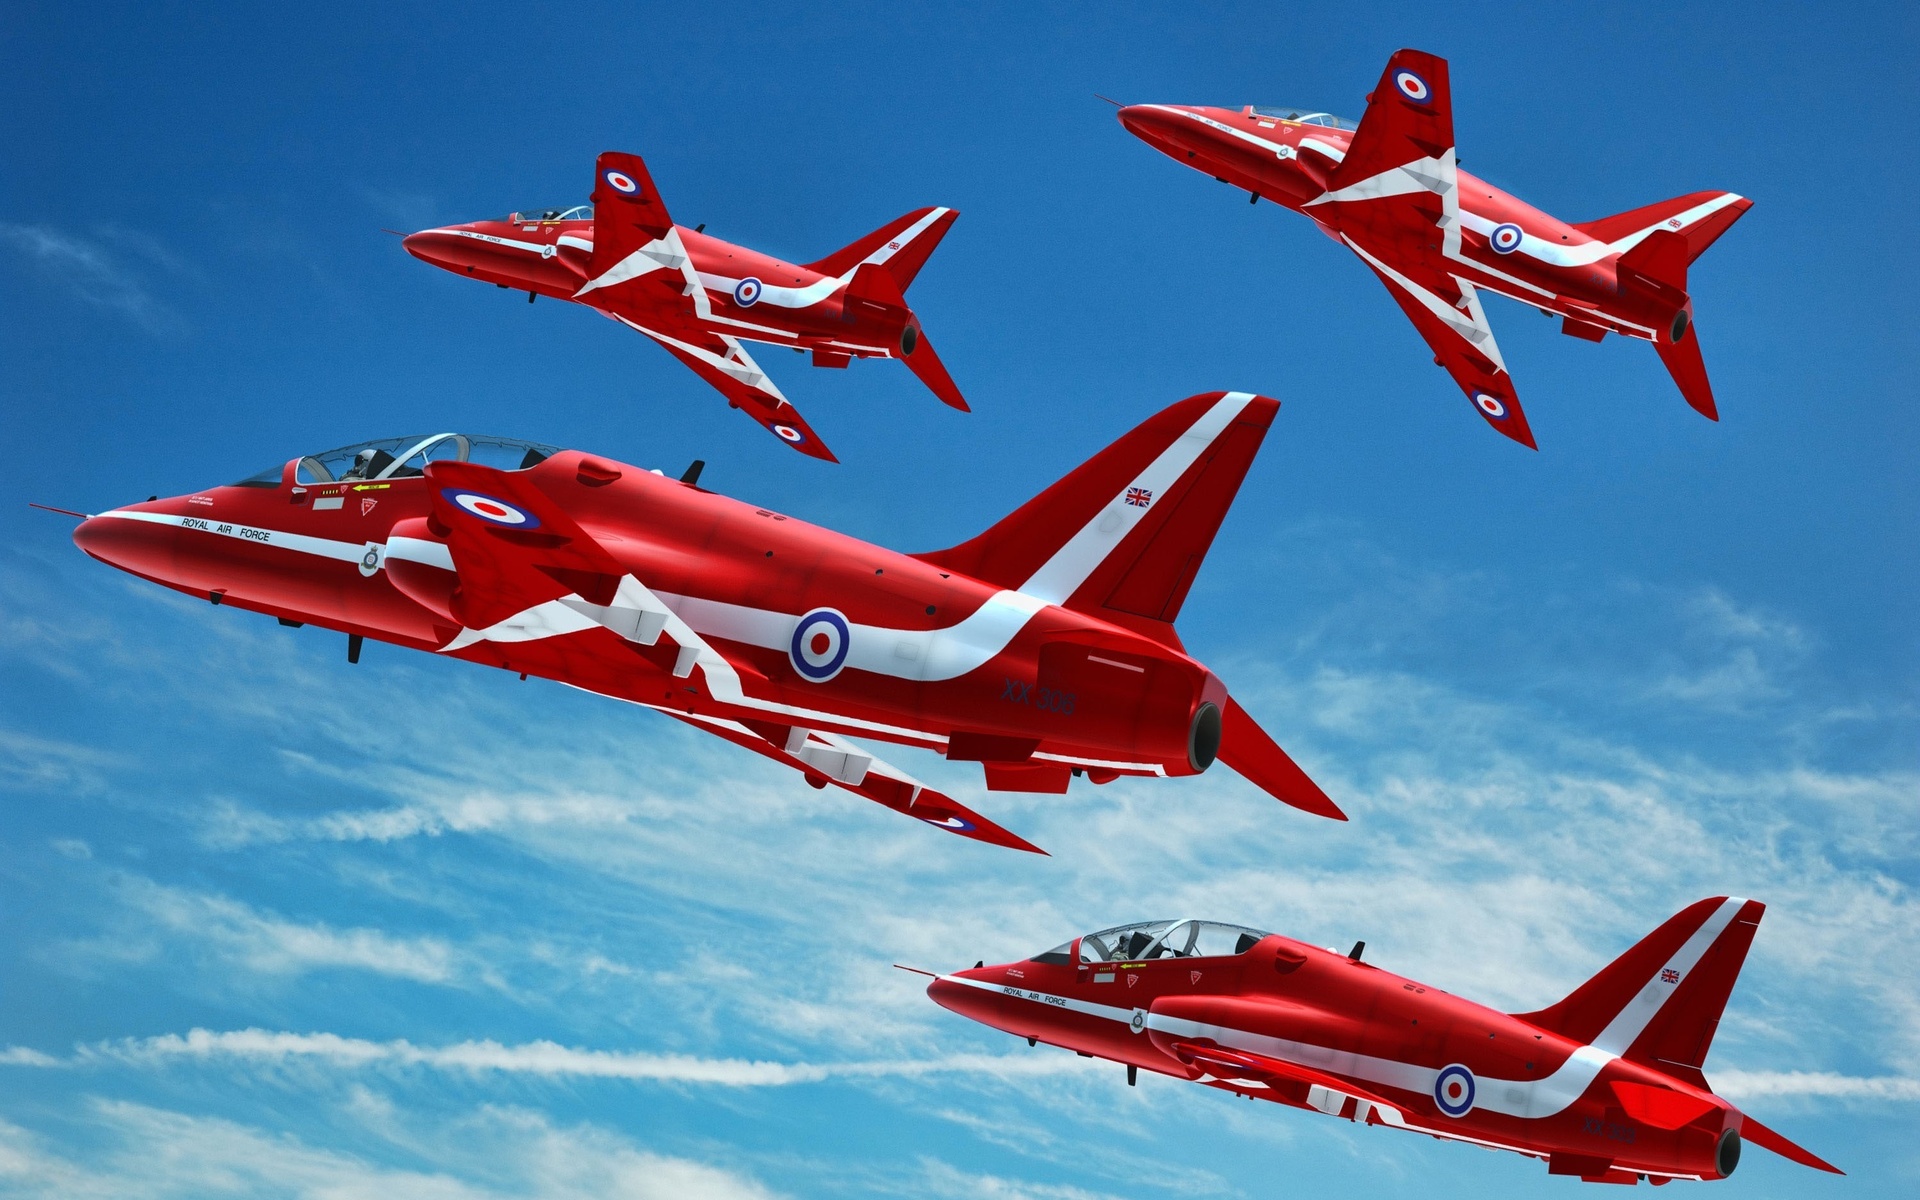 red, Airplanes, Clouds, Sky, Stripes, Flying, Military, Jet, Jets Wallpaper